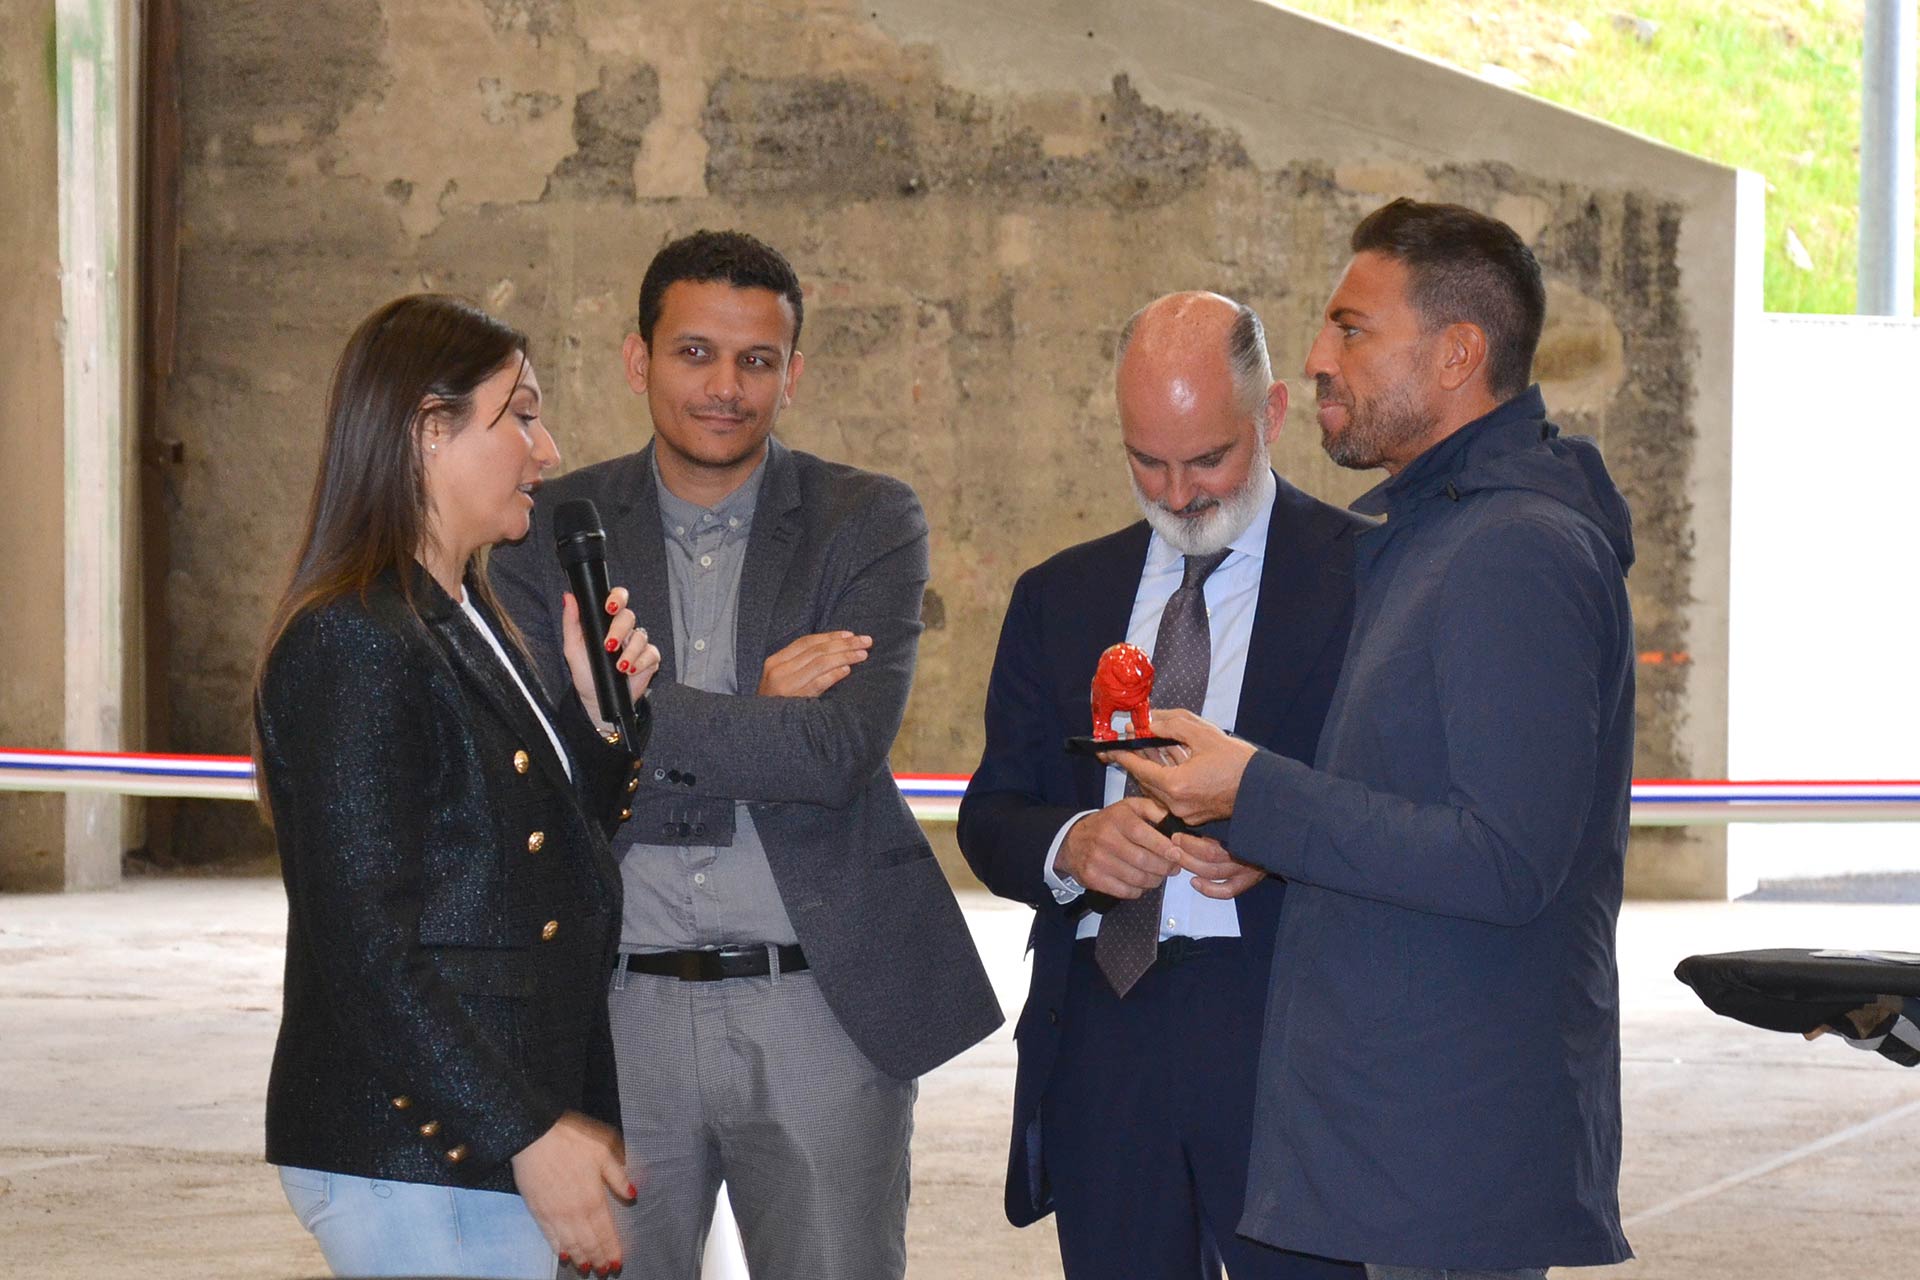 Presentation of the ONLYLYON lion trophy to Valecobois Rhône-Alpes (Saviola Group) during the inauguration of its wood waste recycling facility on Tuesday, 31 May 2022 in Givors